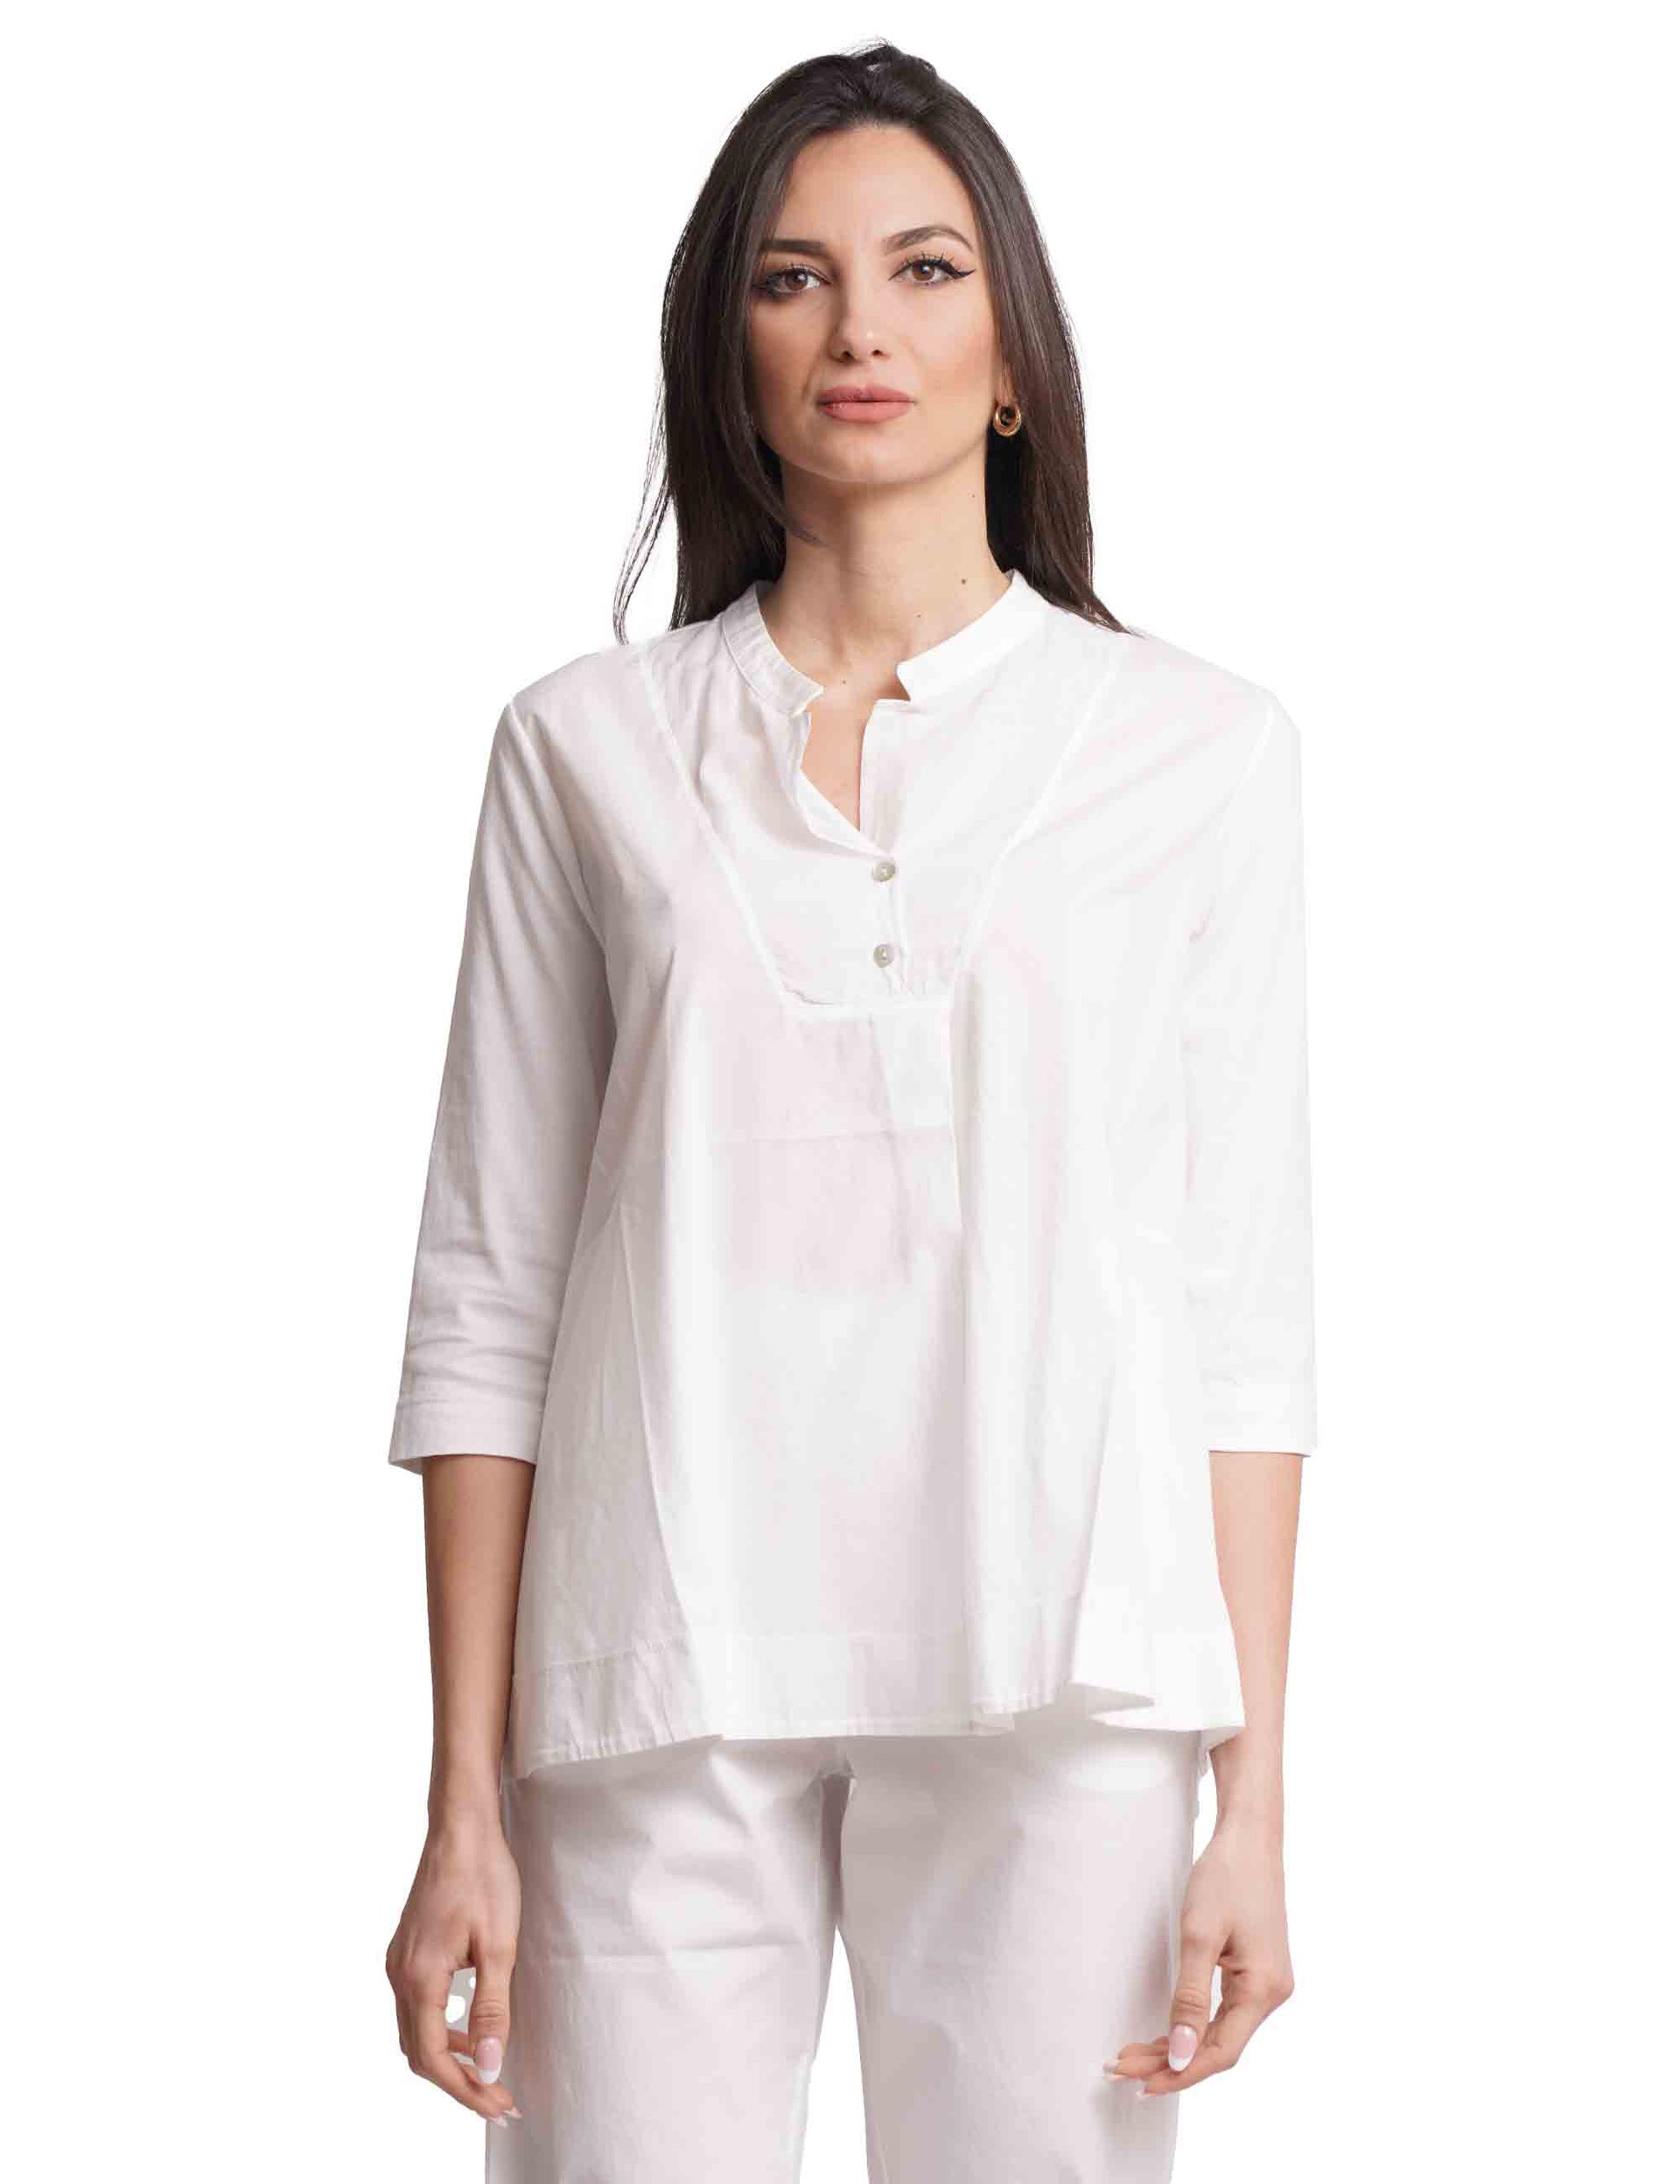 Women's white cotton shirts with 3/4 sleeves